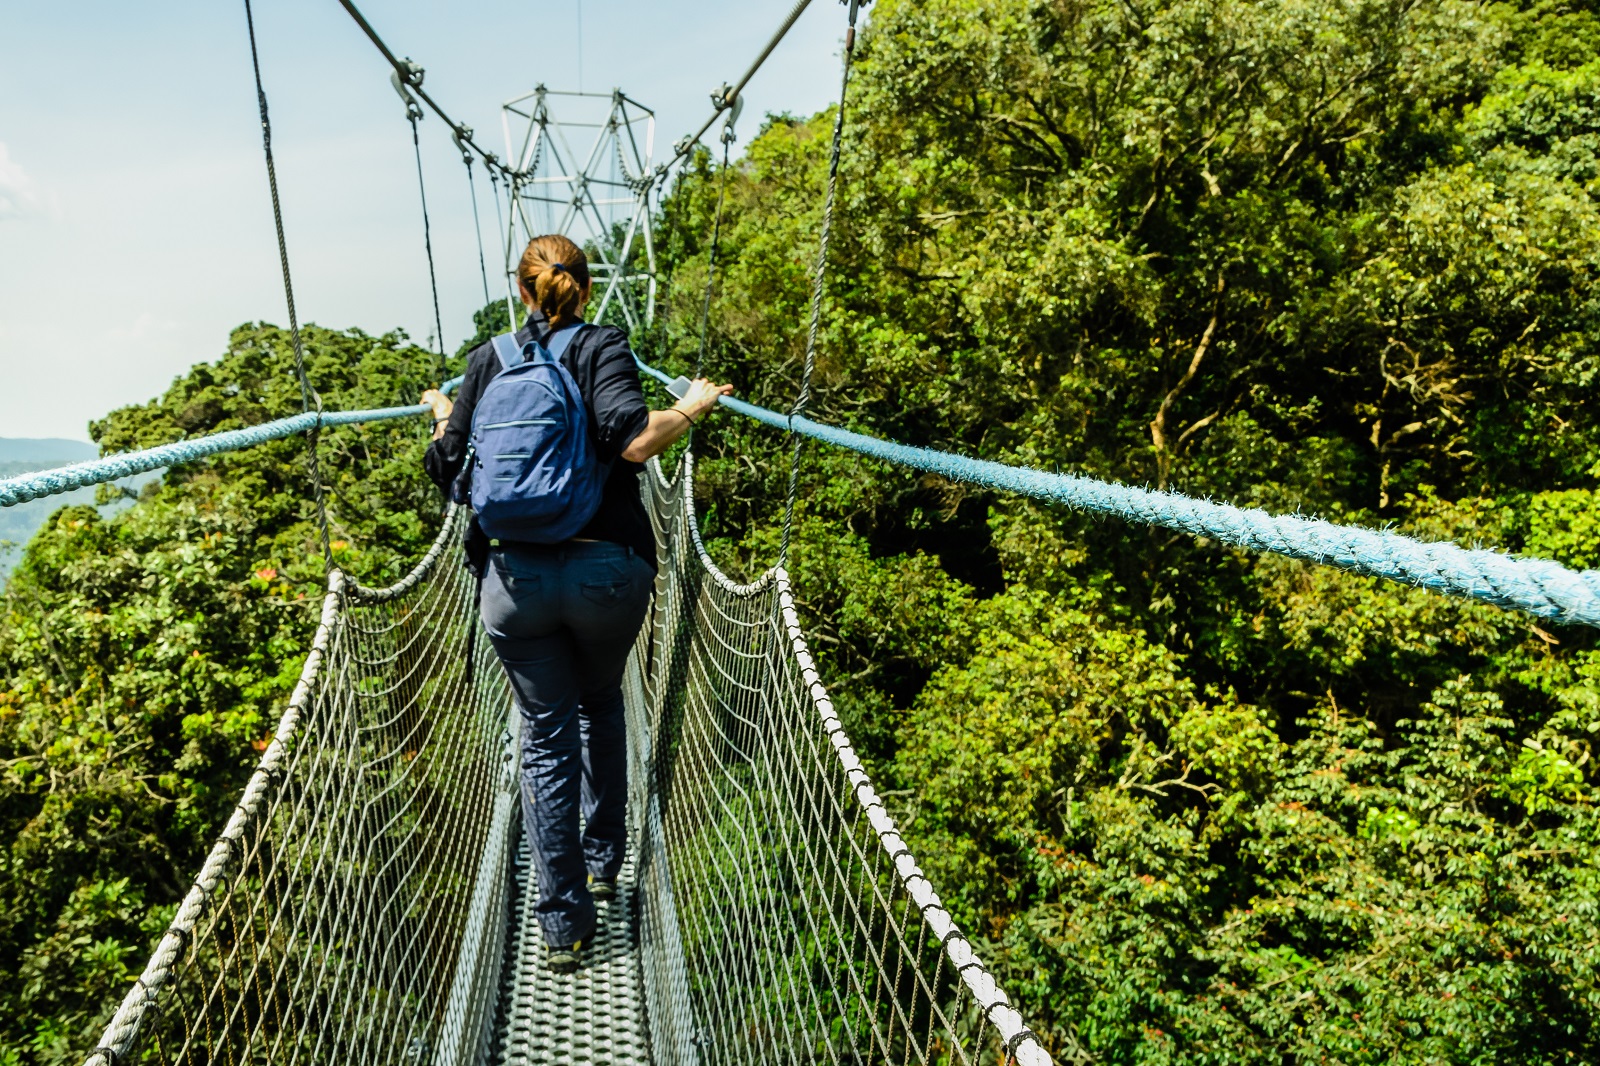 The canopy walk in the Nyungwe forest National Park